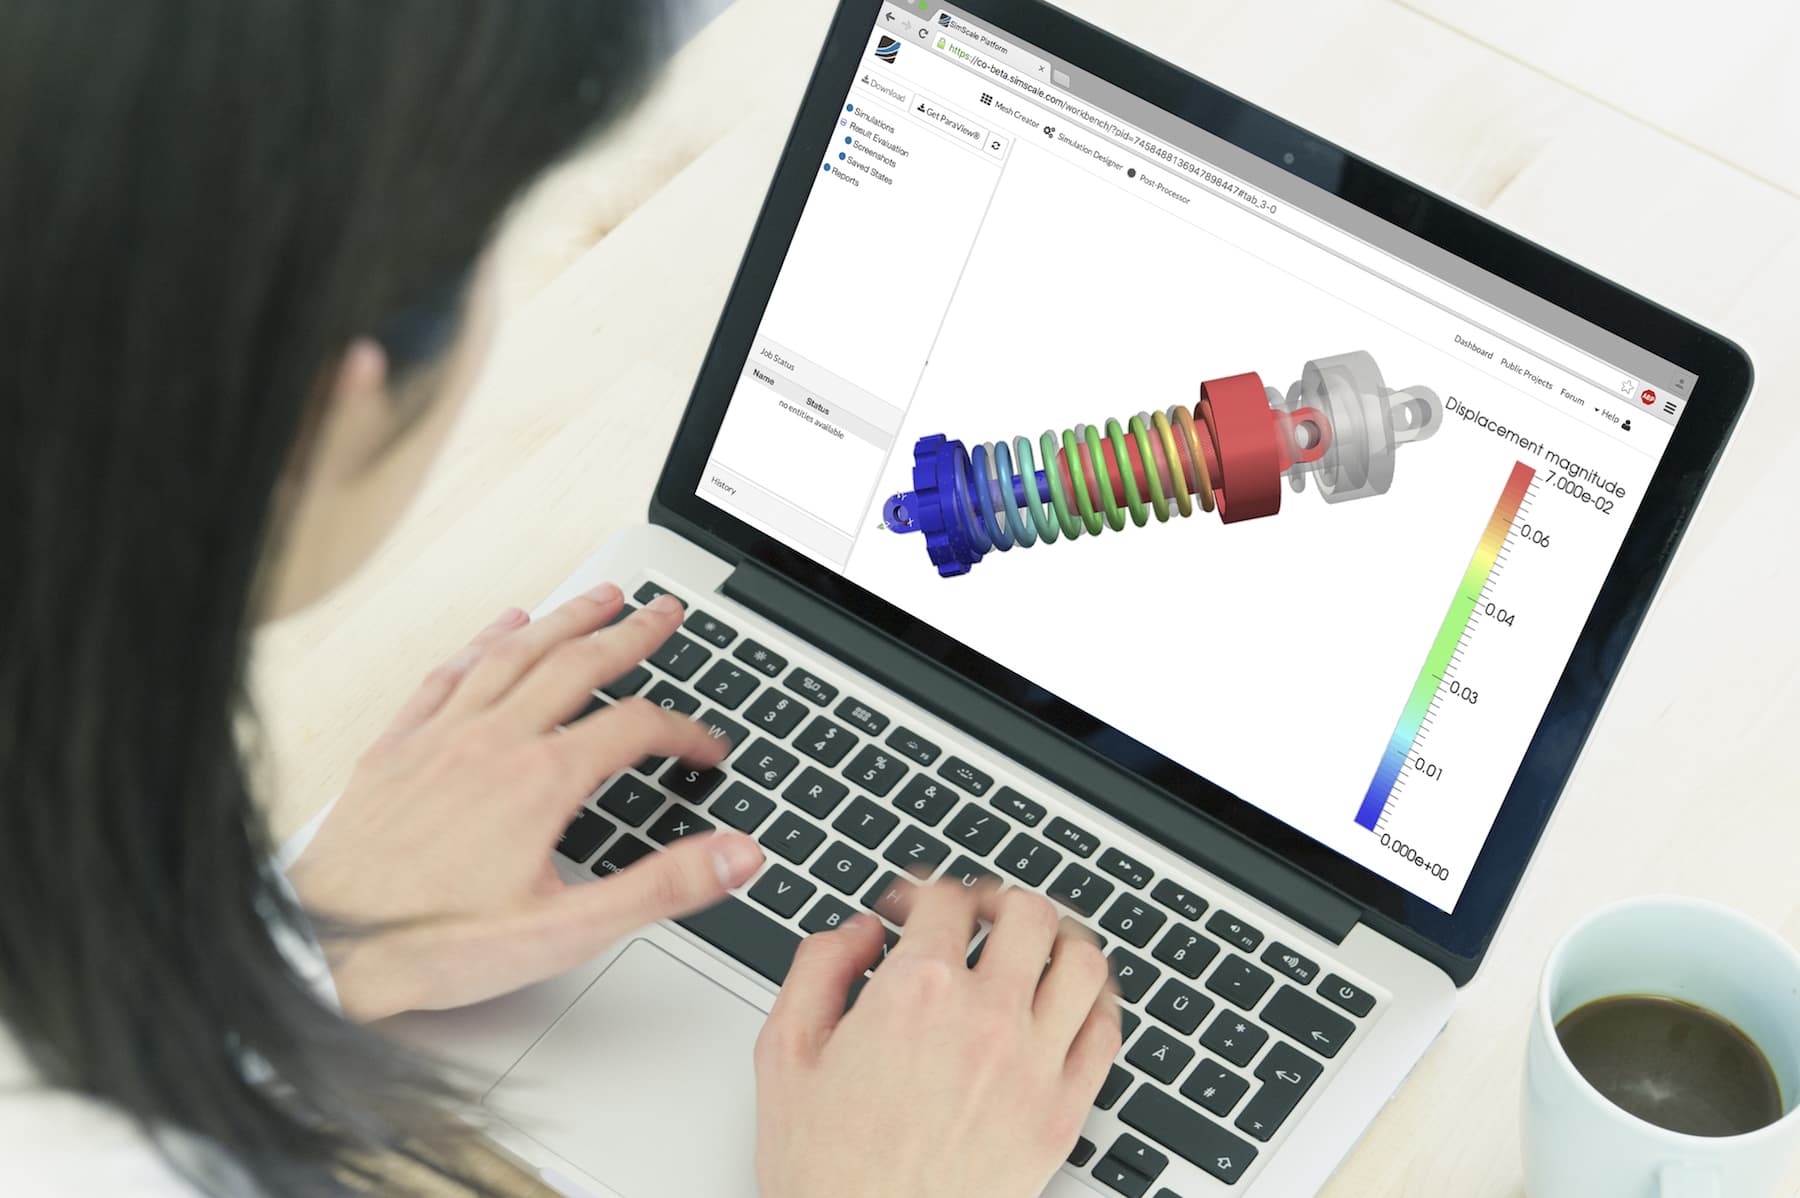 SimScale Integrates Parasolid and HOOPS Exchange for more Powerful 3D CAD Handling